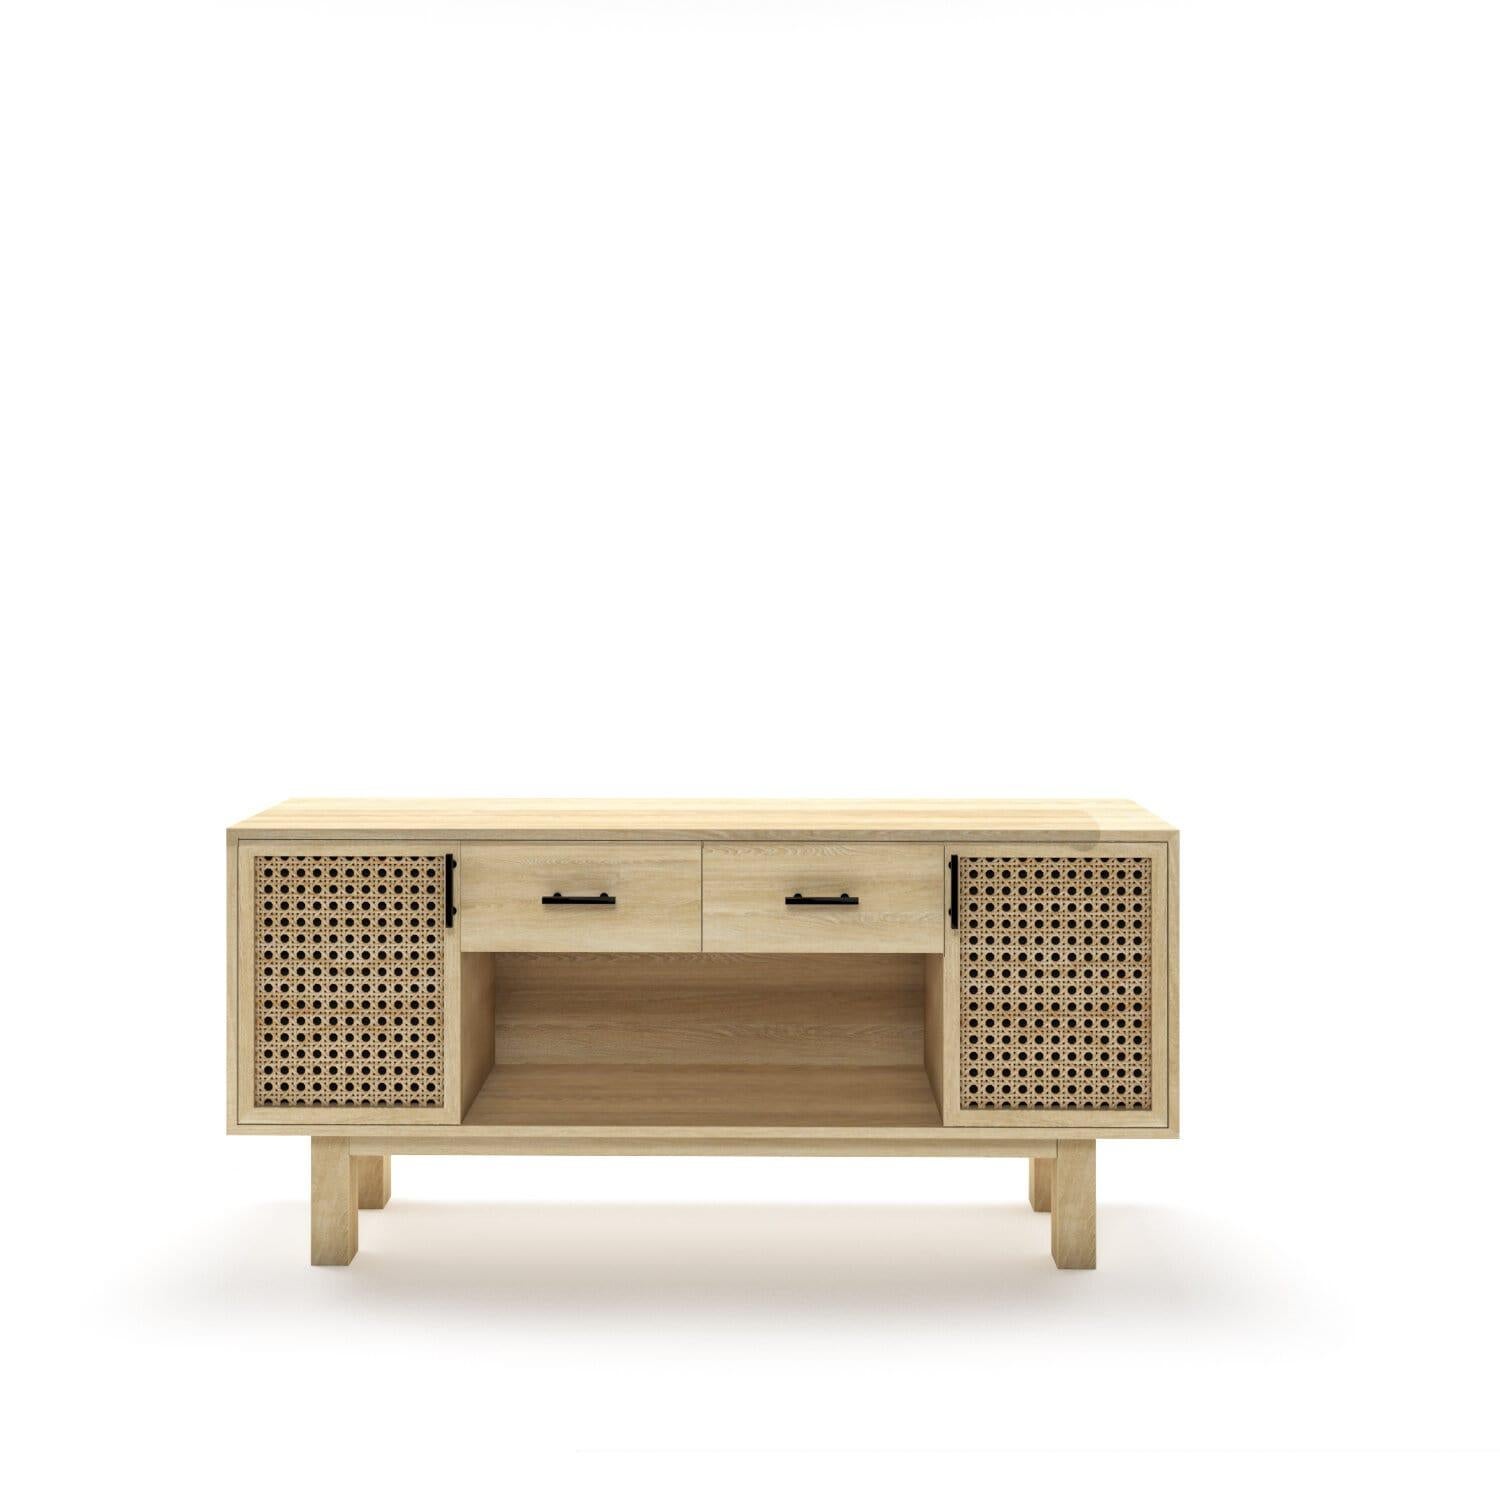 Bring a touch of beauty to your home with Triska, a stately sideboard crafted from magnificent massive oak. The durable cane pattern adds a unique charm to any dining area. Impress your guests with this stunning piece!

All Tektōn pieces are made of